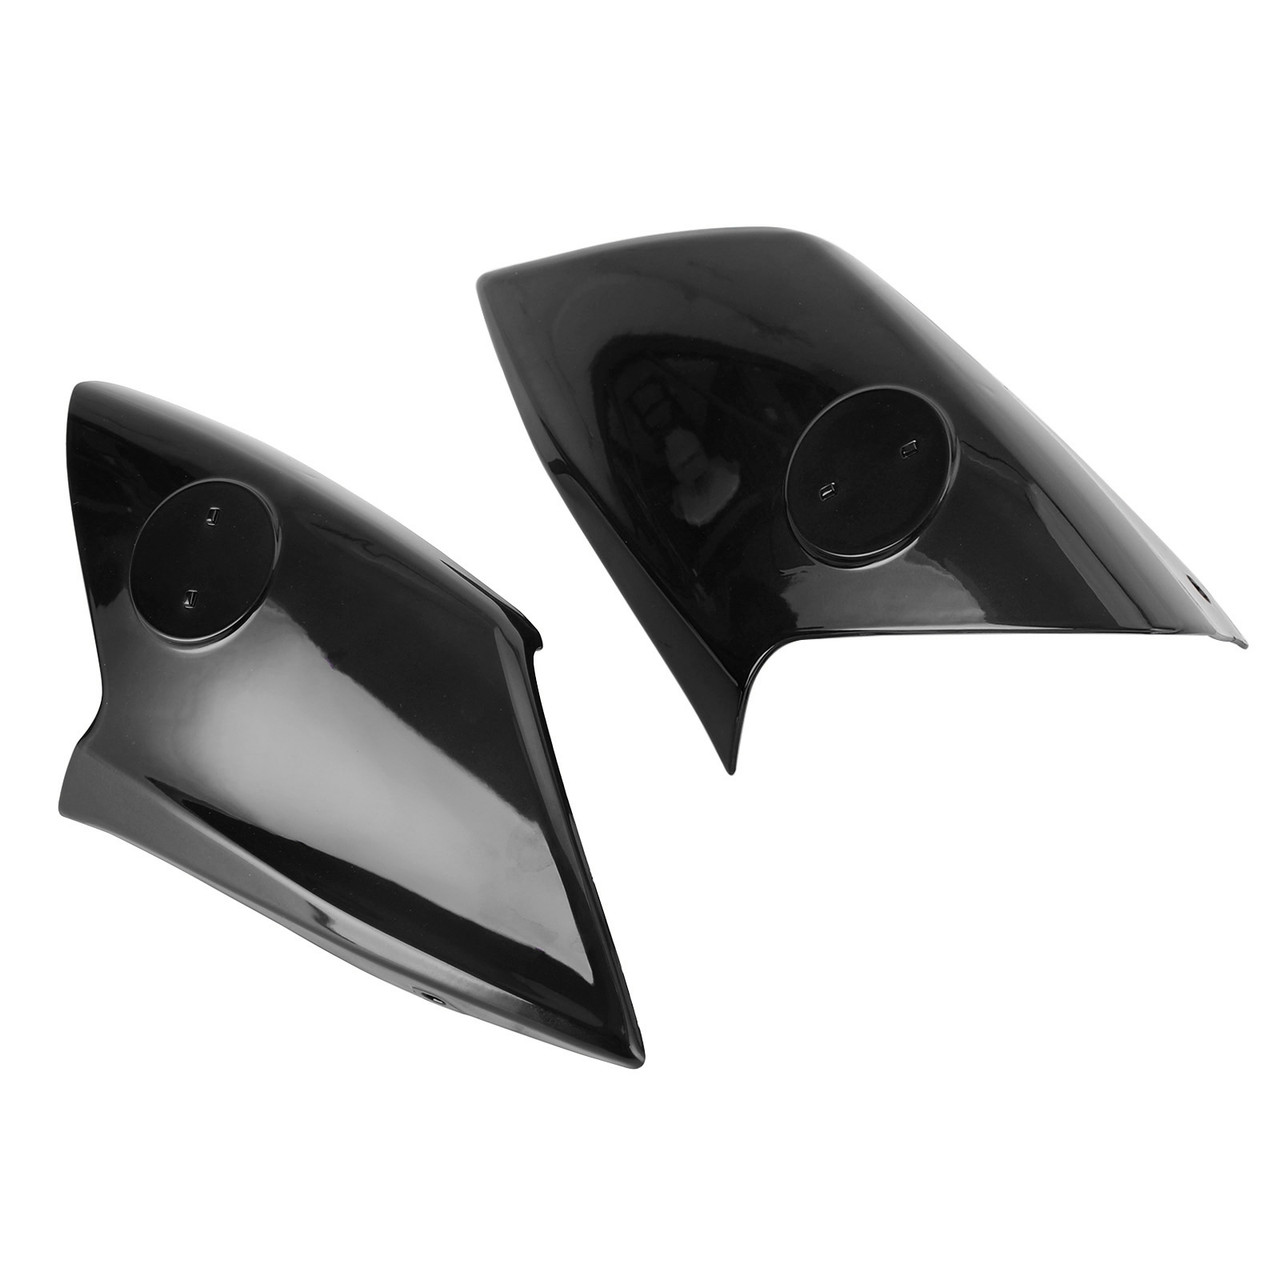 Air Intake Covers Tank Side Panel Fairing For Yamaha MT-09 FZ09 2021-2023 BLK